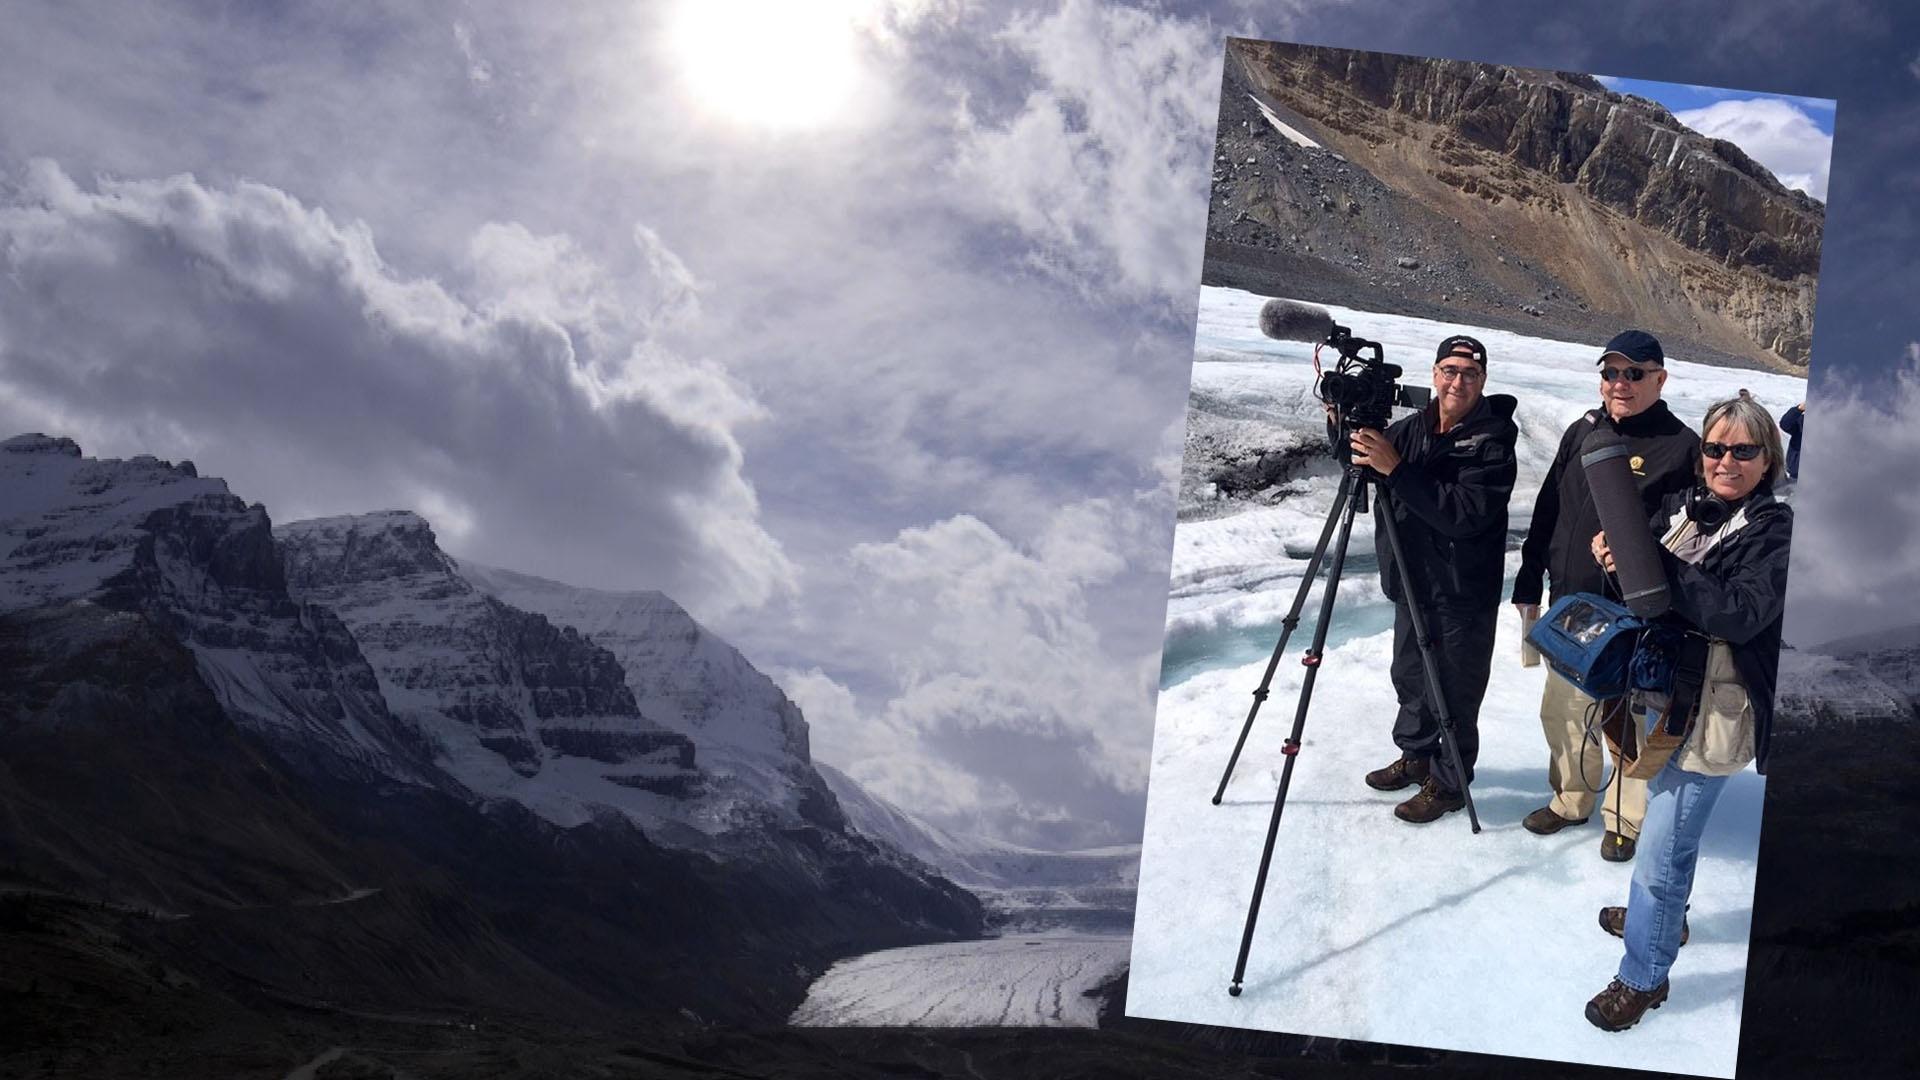 Videographer Jim Zinkowski, Producer John Grant and Sound Recordist Tami Coleman on location at the Athabasca Glacier for Canadian Rockies by Rail.